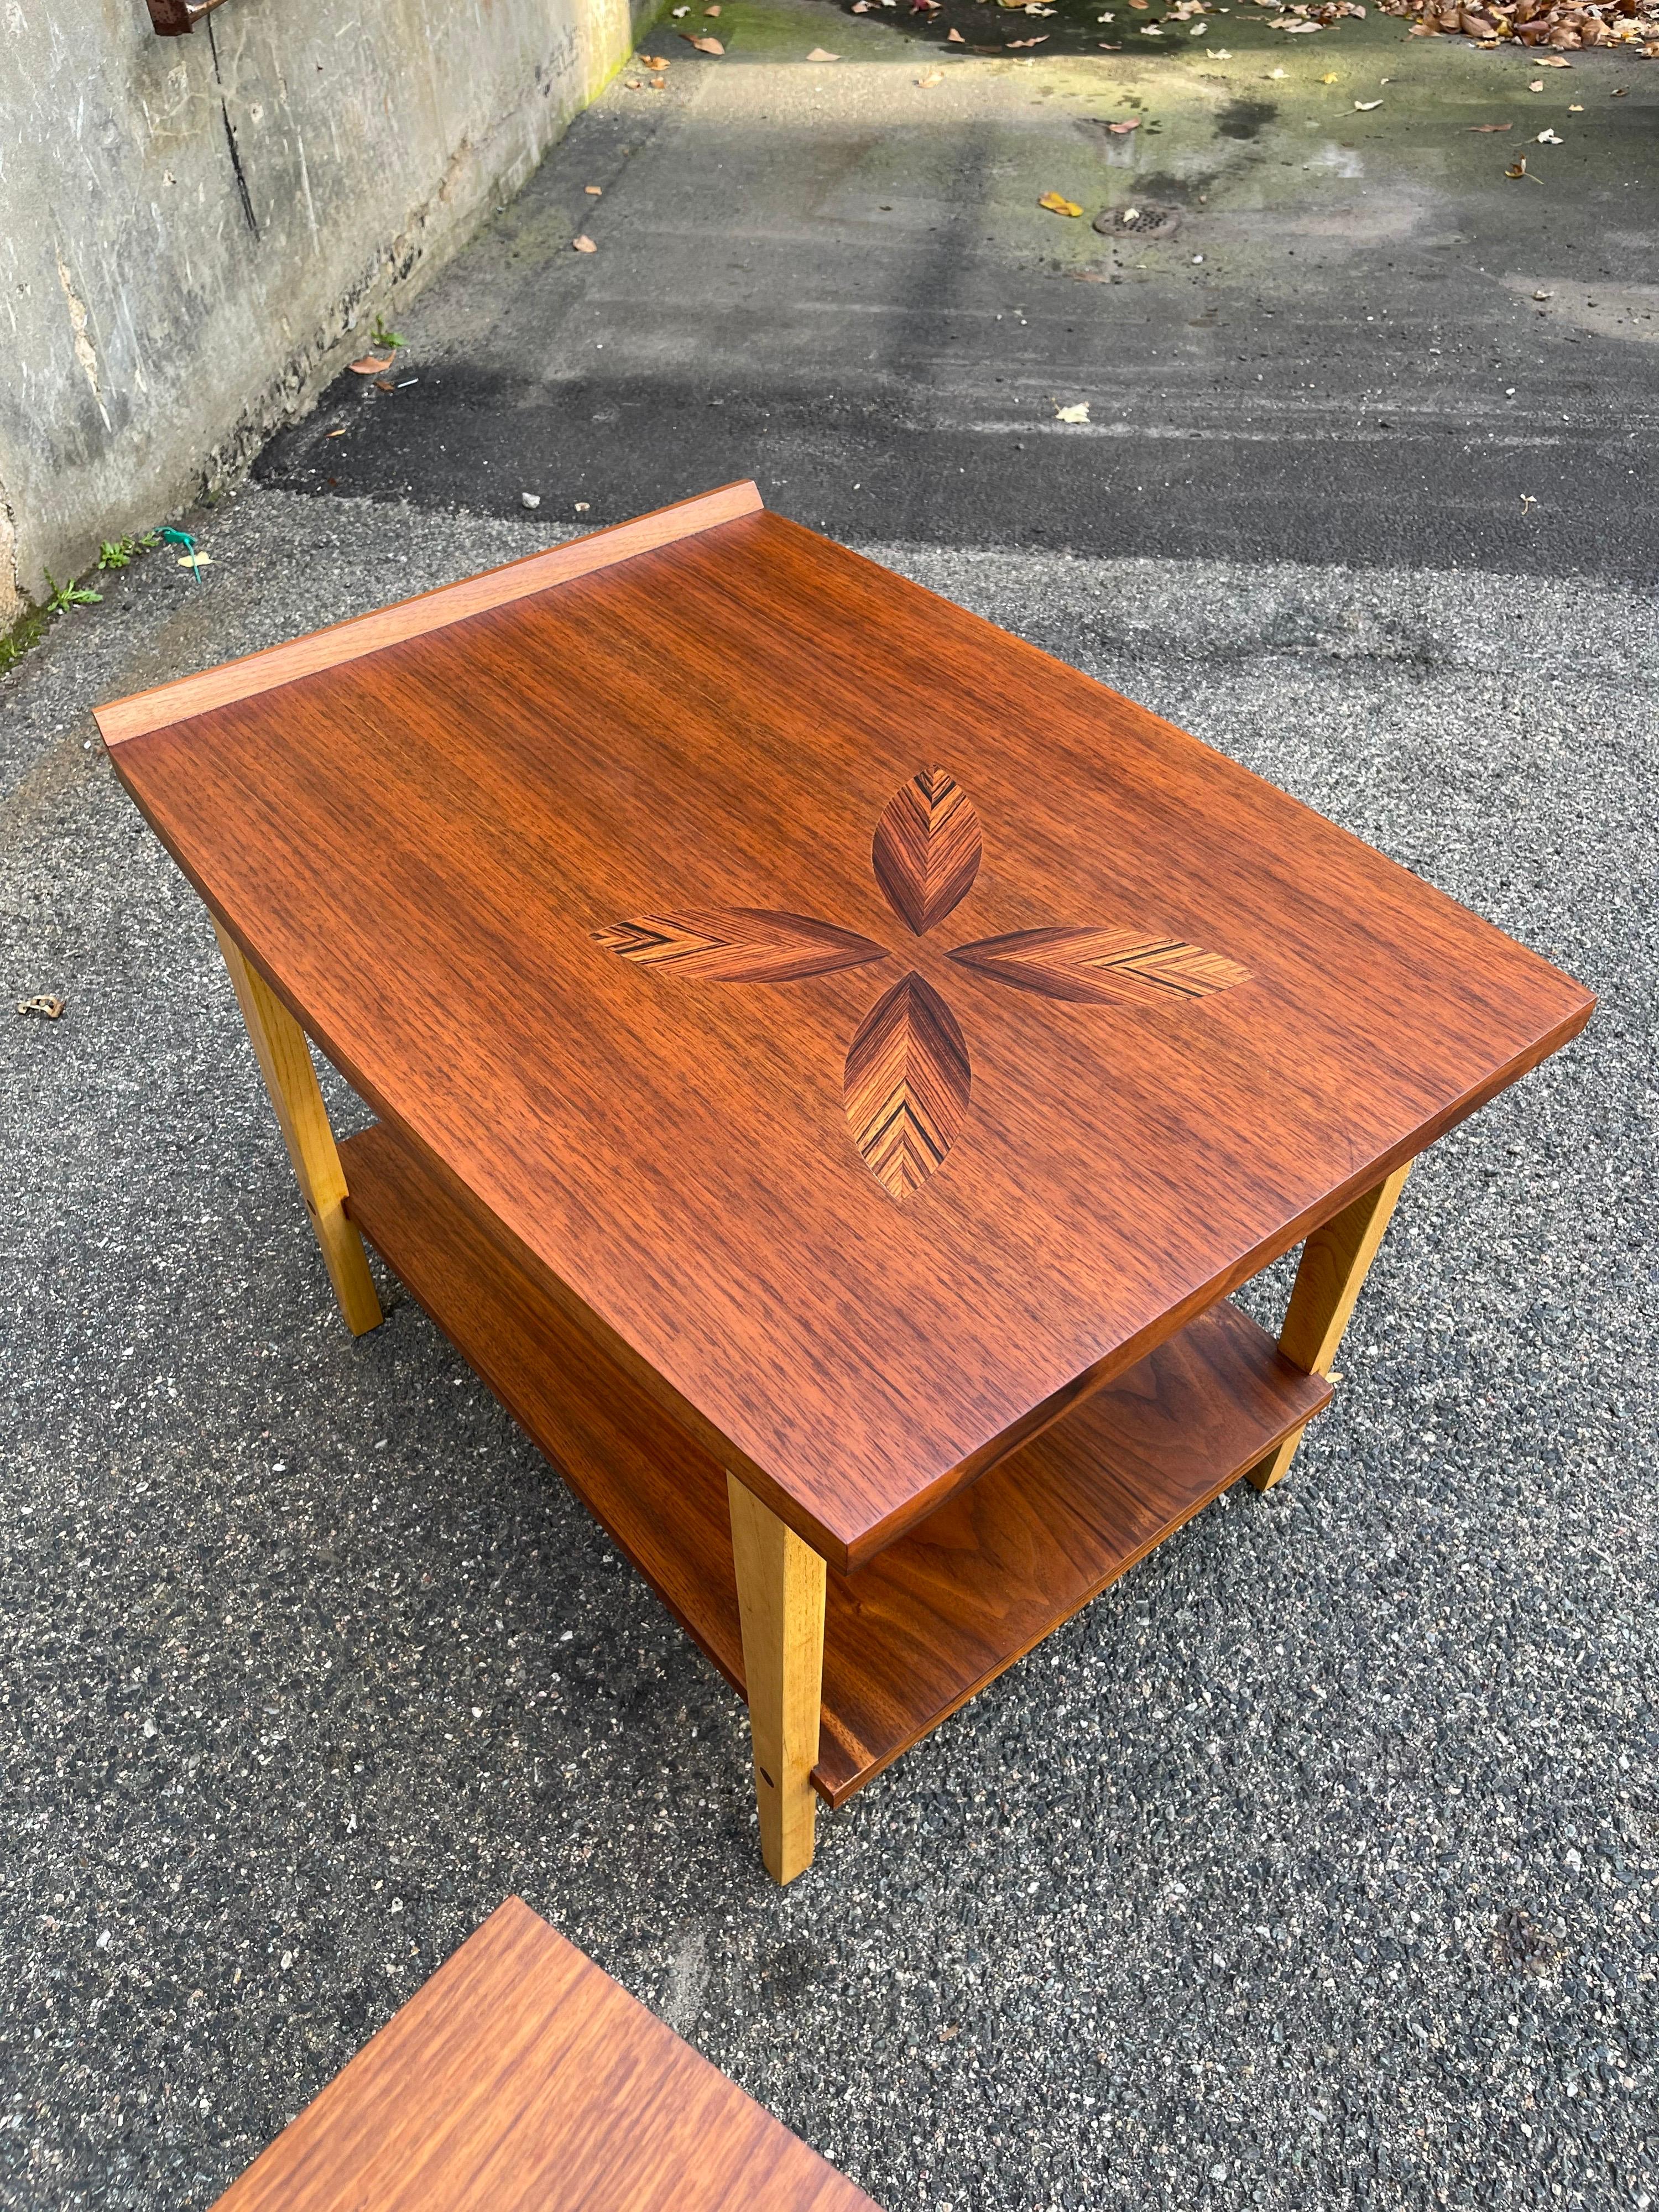 Mid-20th Century Mid-Century Modern End Tables with Rosewood Inlay by Lane Furniture   For Sale